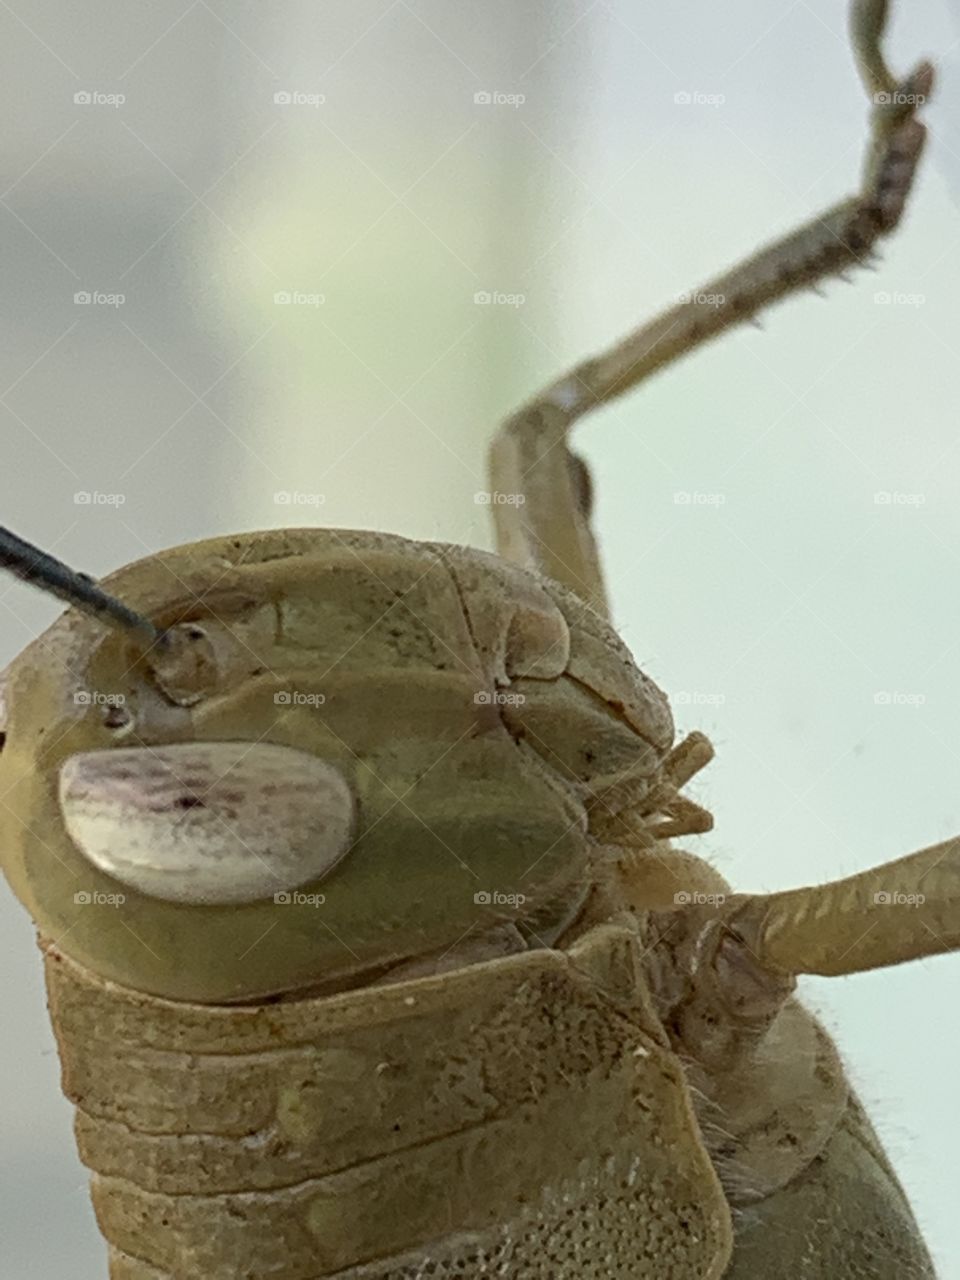 Grasshoppers face